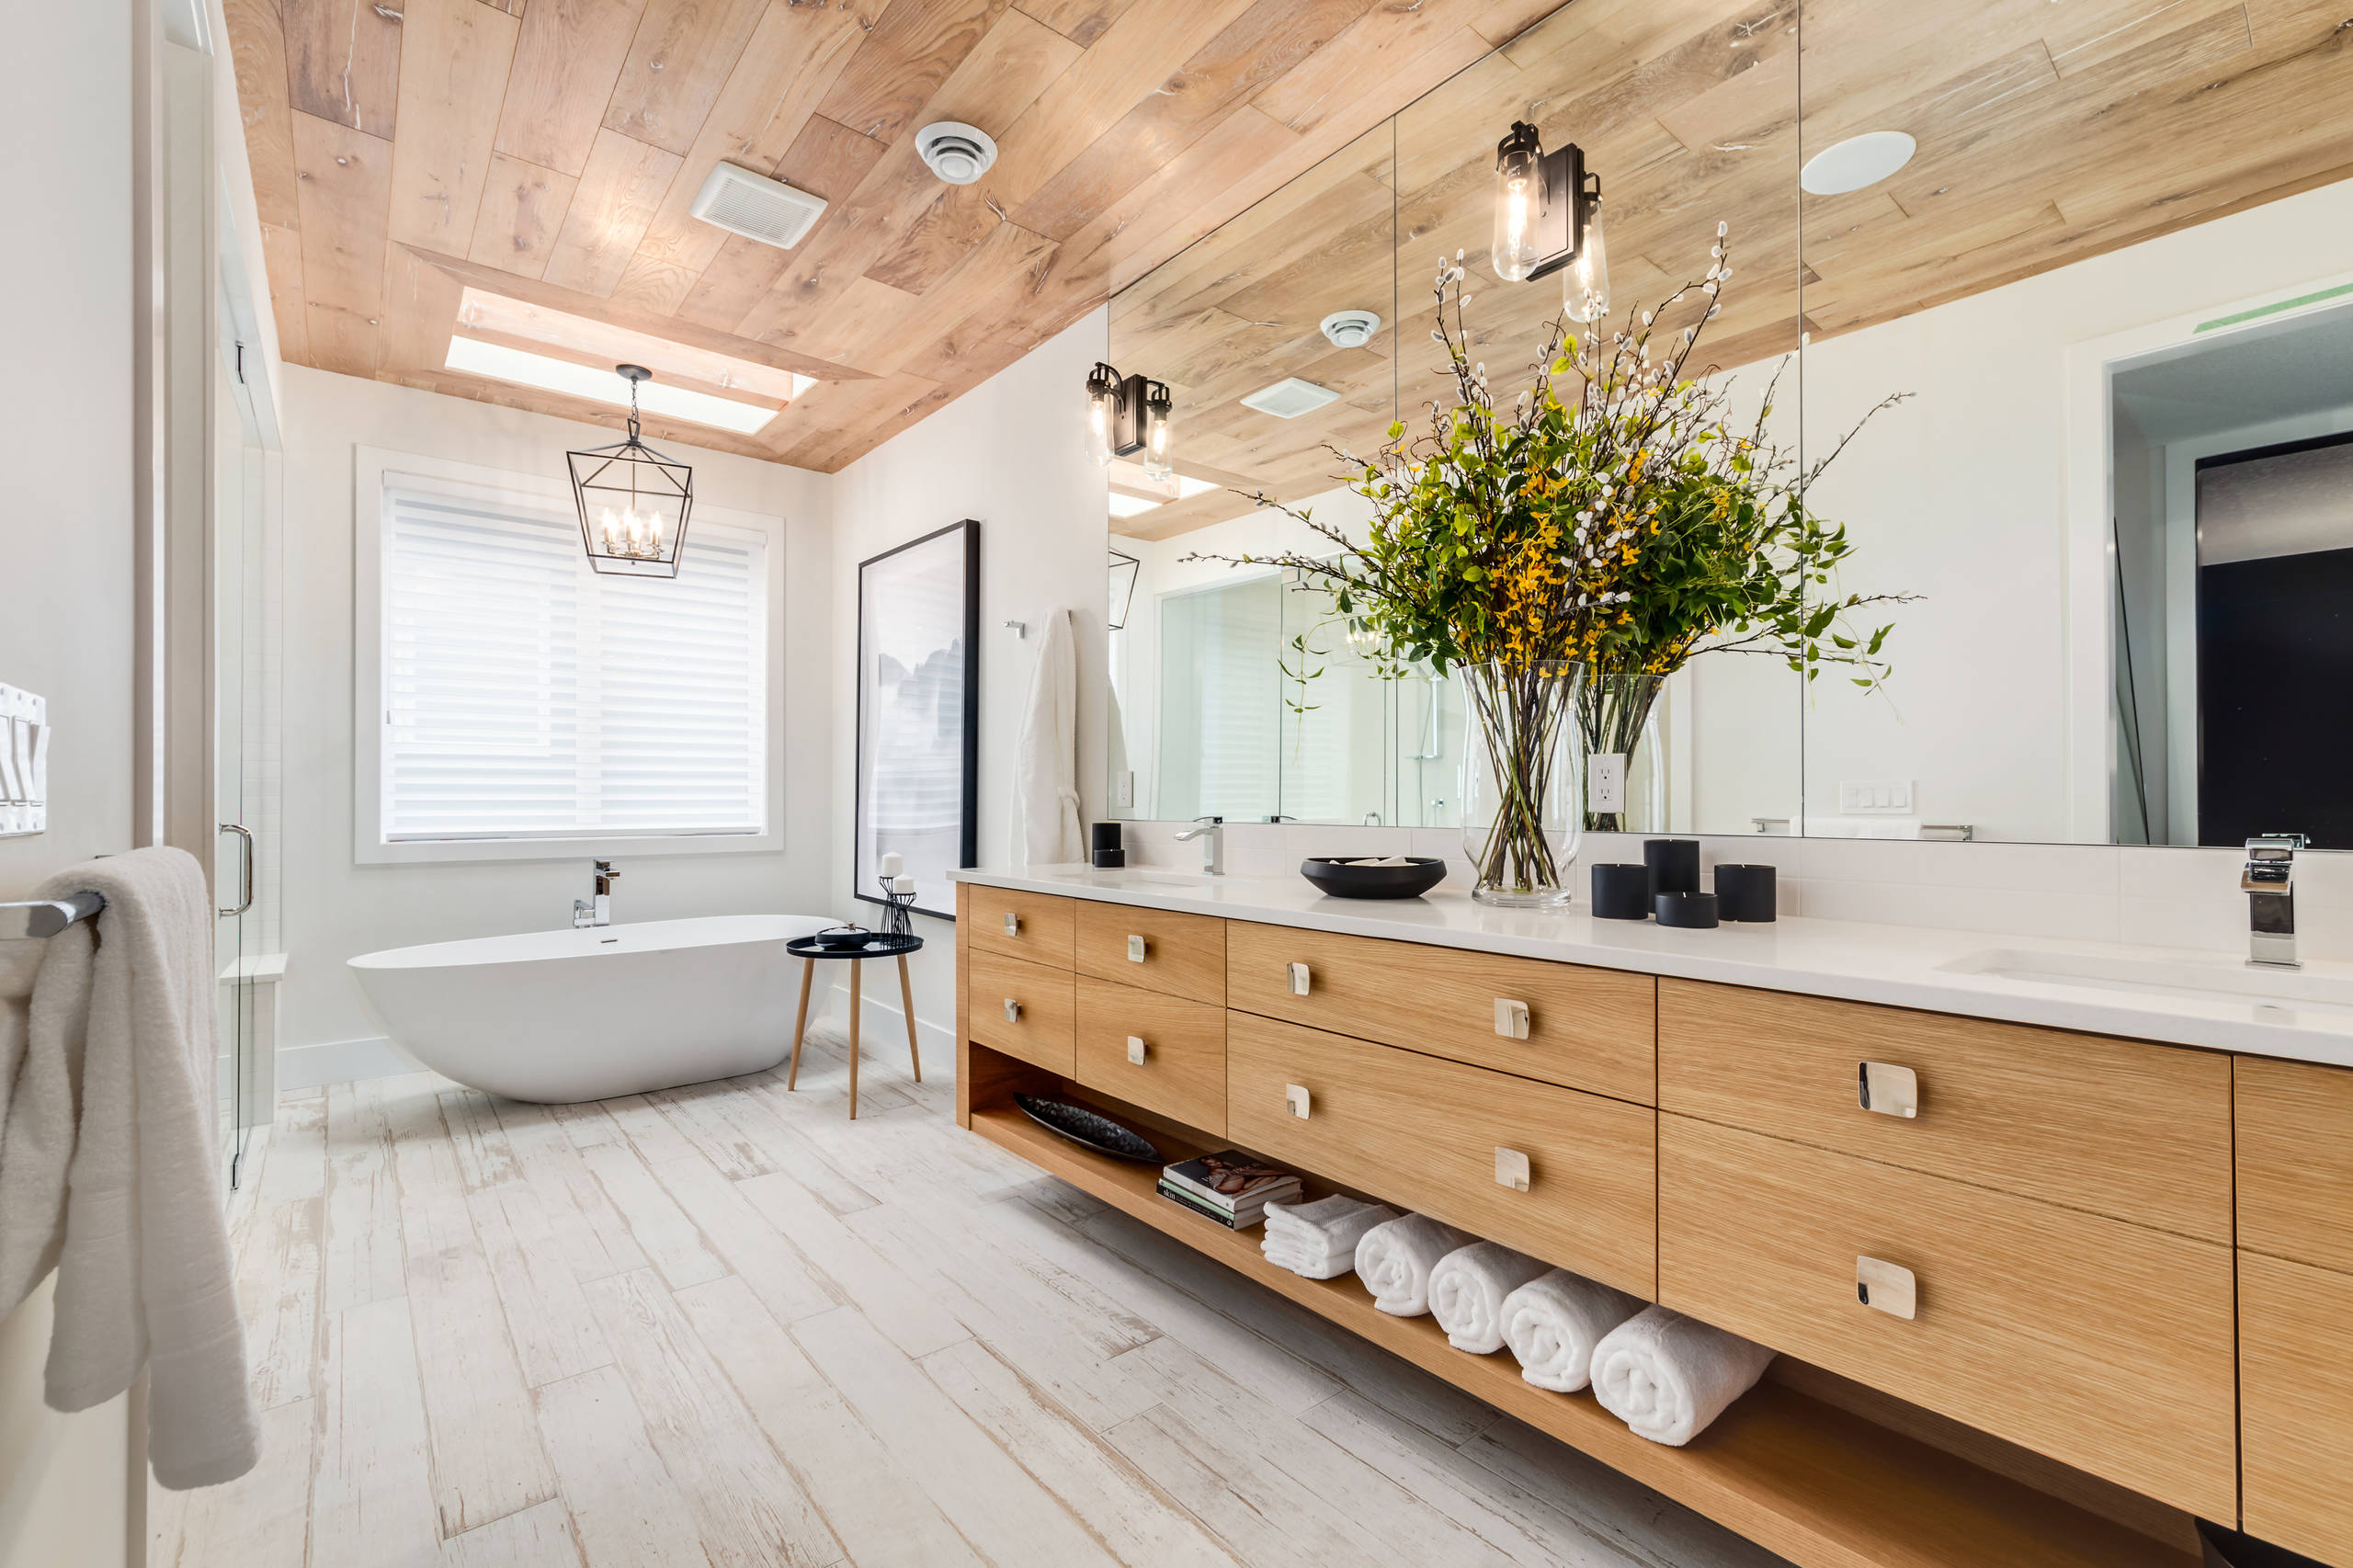 18+ Bathroom with Wooden Floor Ideas to Inspire You in 2022 - Decor Snob